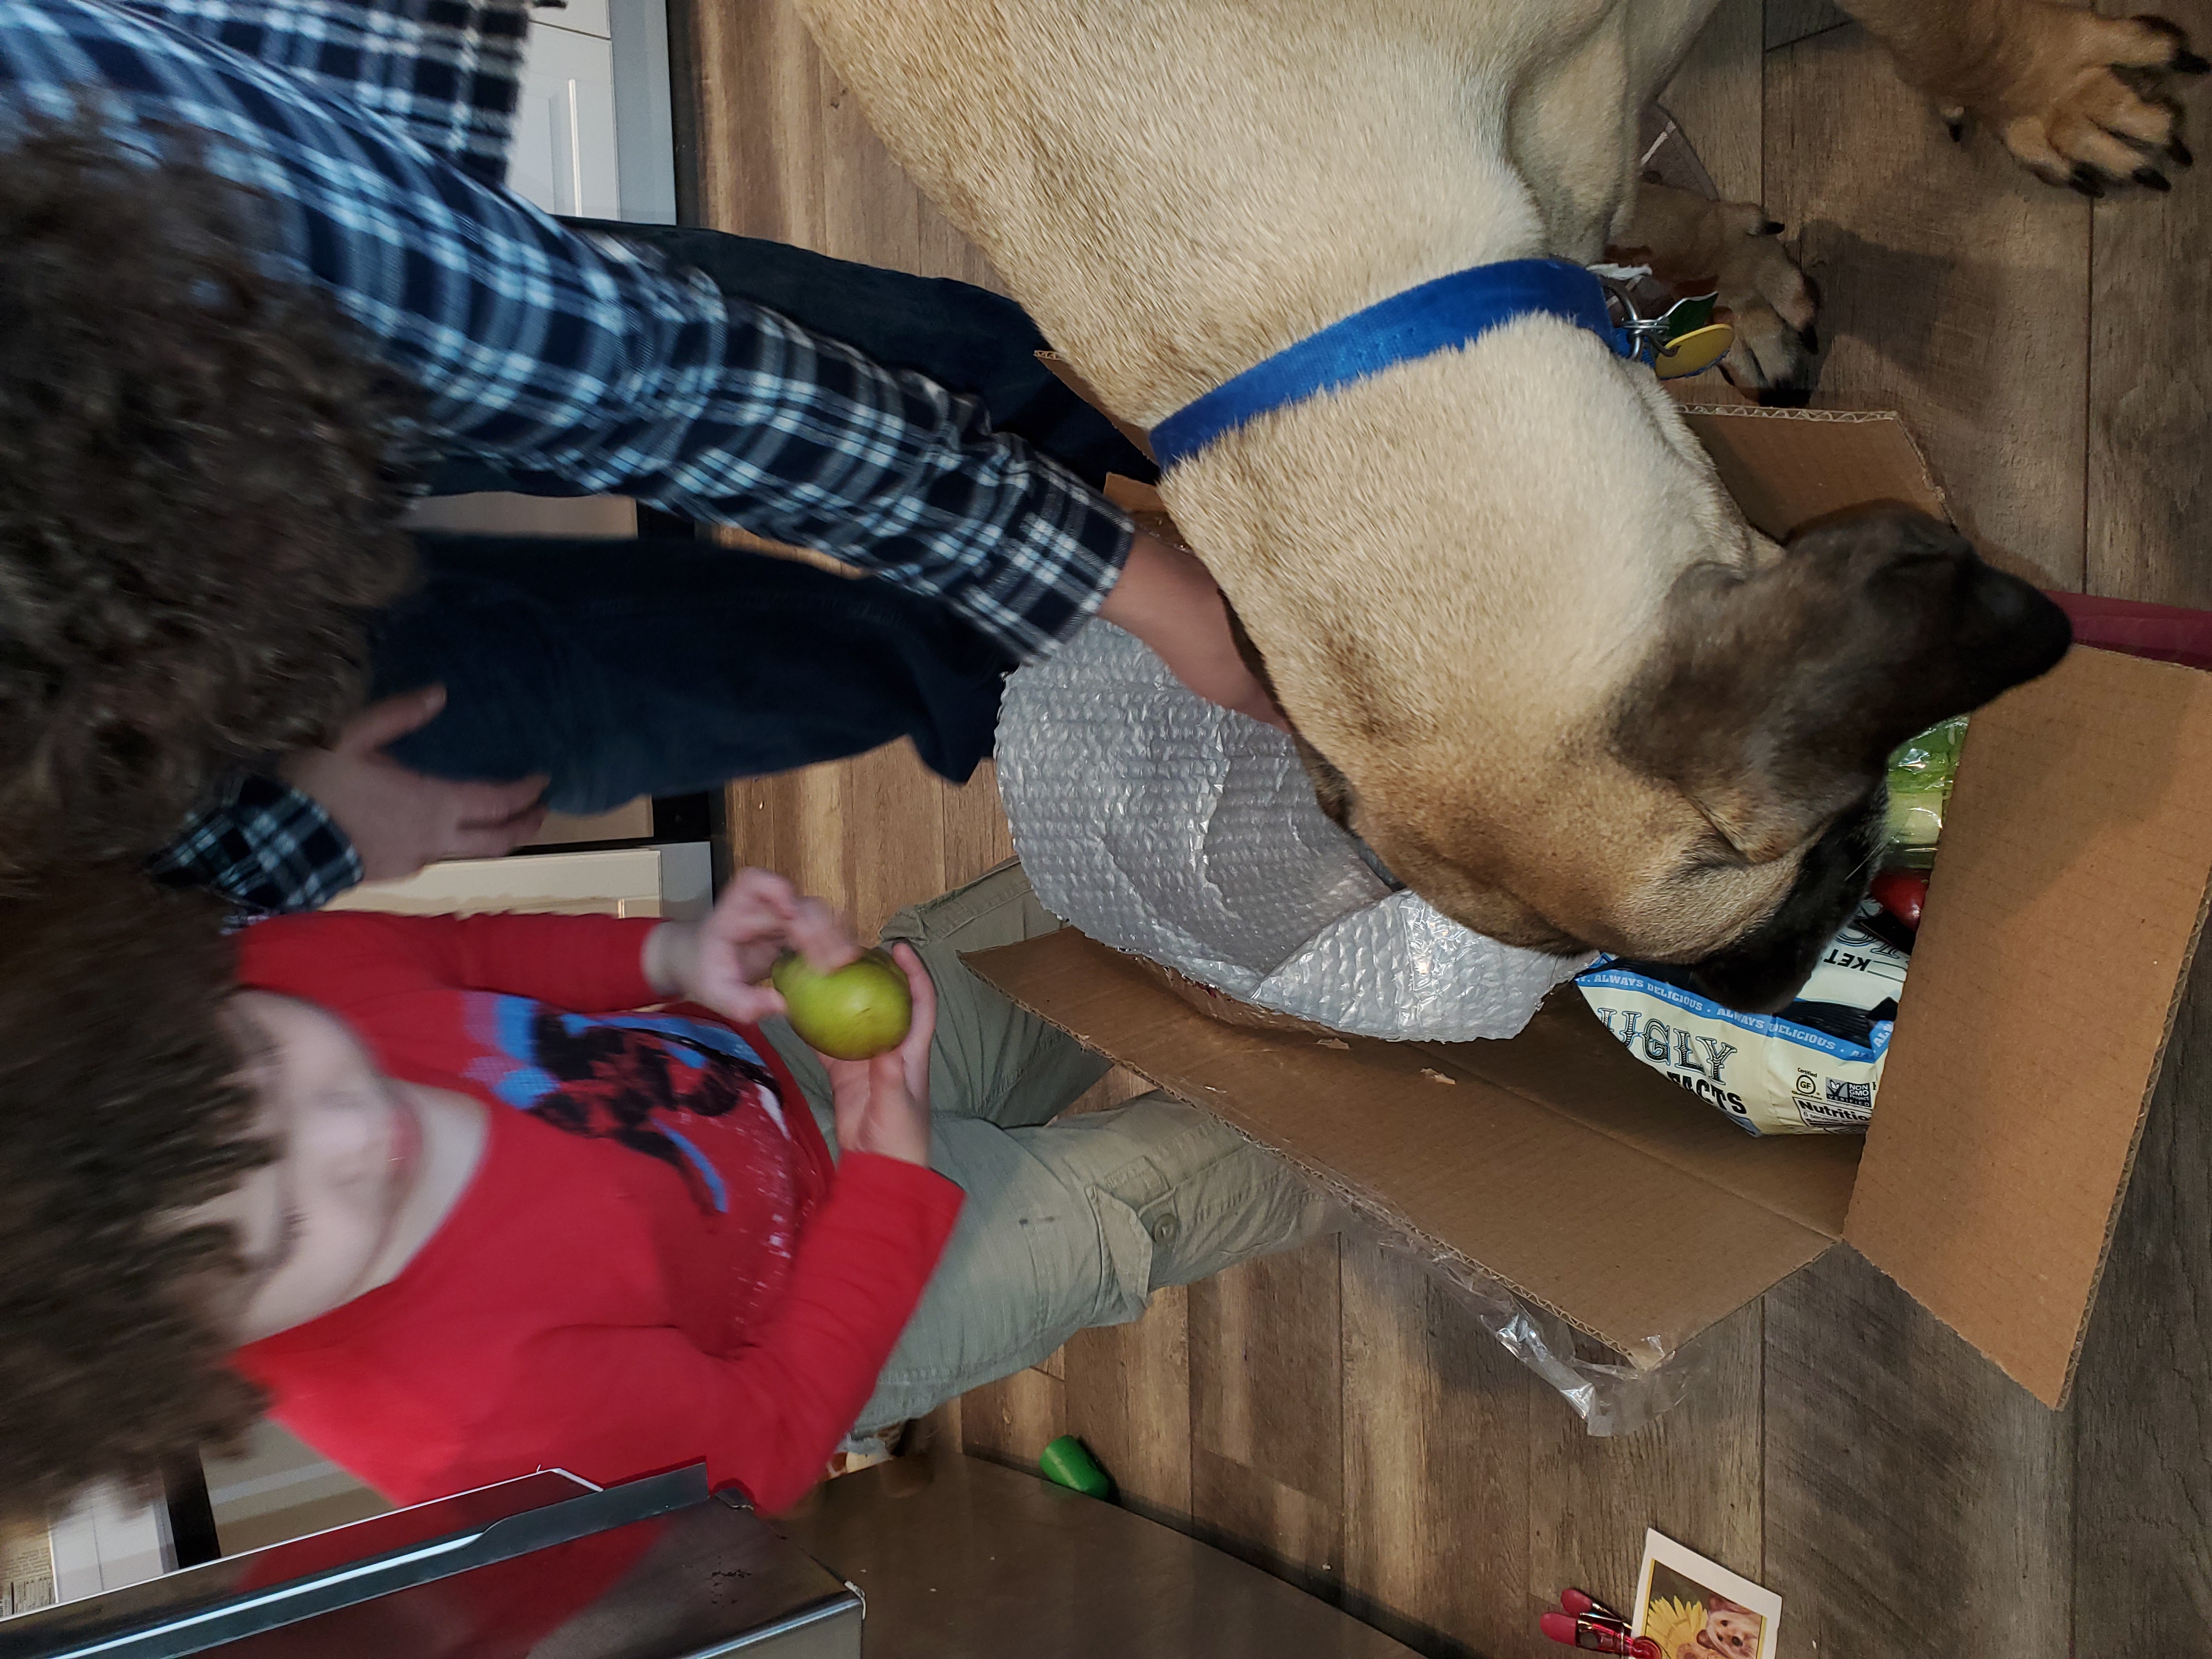 Dog child and man with grocery box